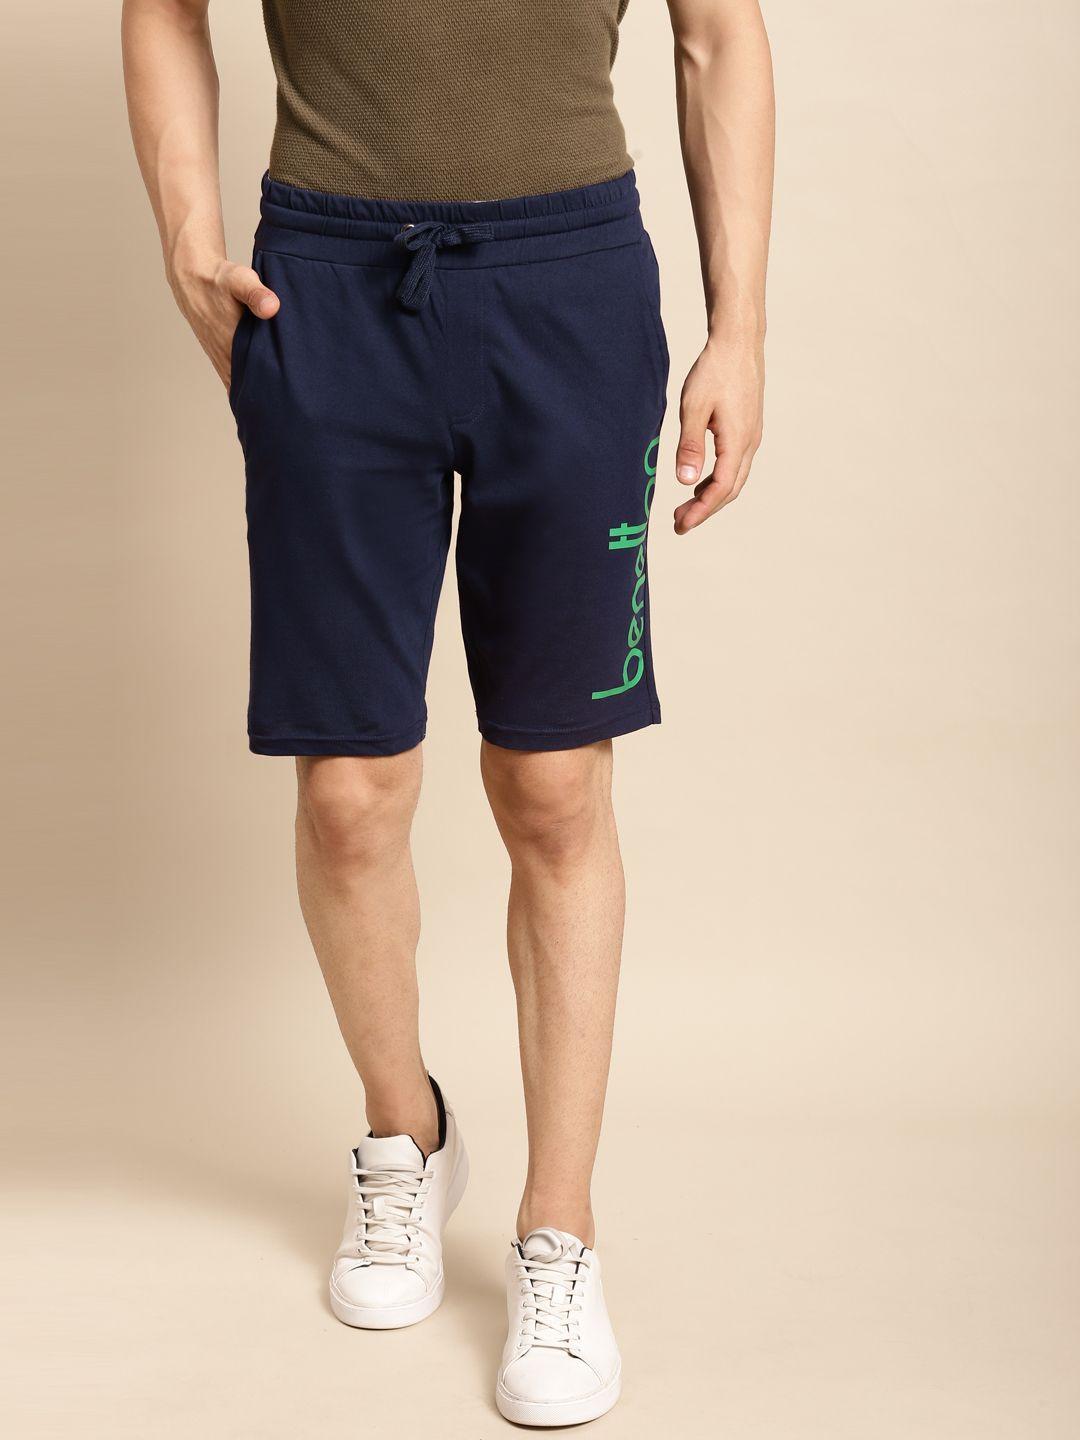 united colors of benetton men navy blue & green brand logo pure cotton slim fit shorts